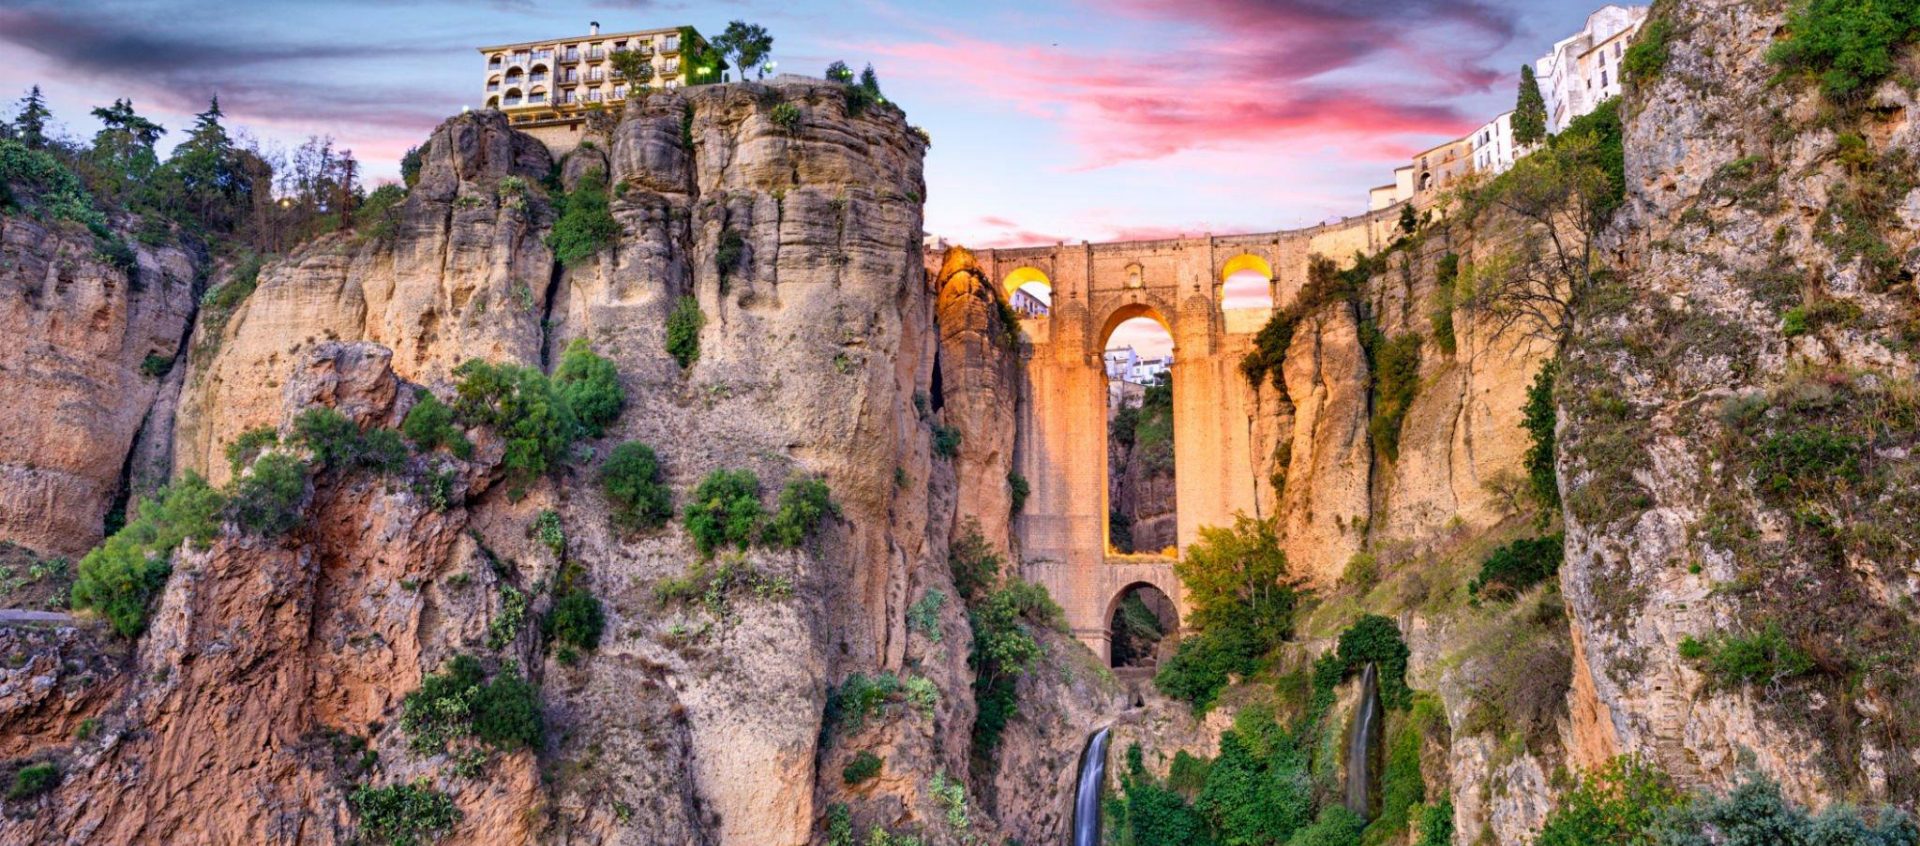 Bridge over the river of the city of Ronda between the high mountains like a clift.